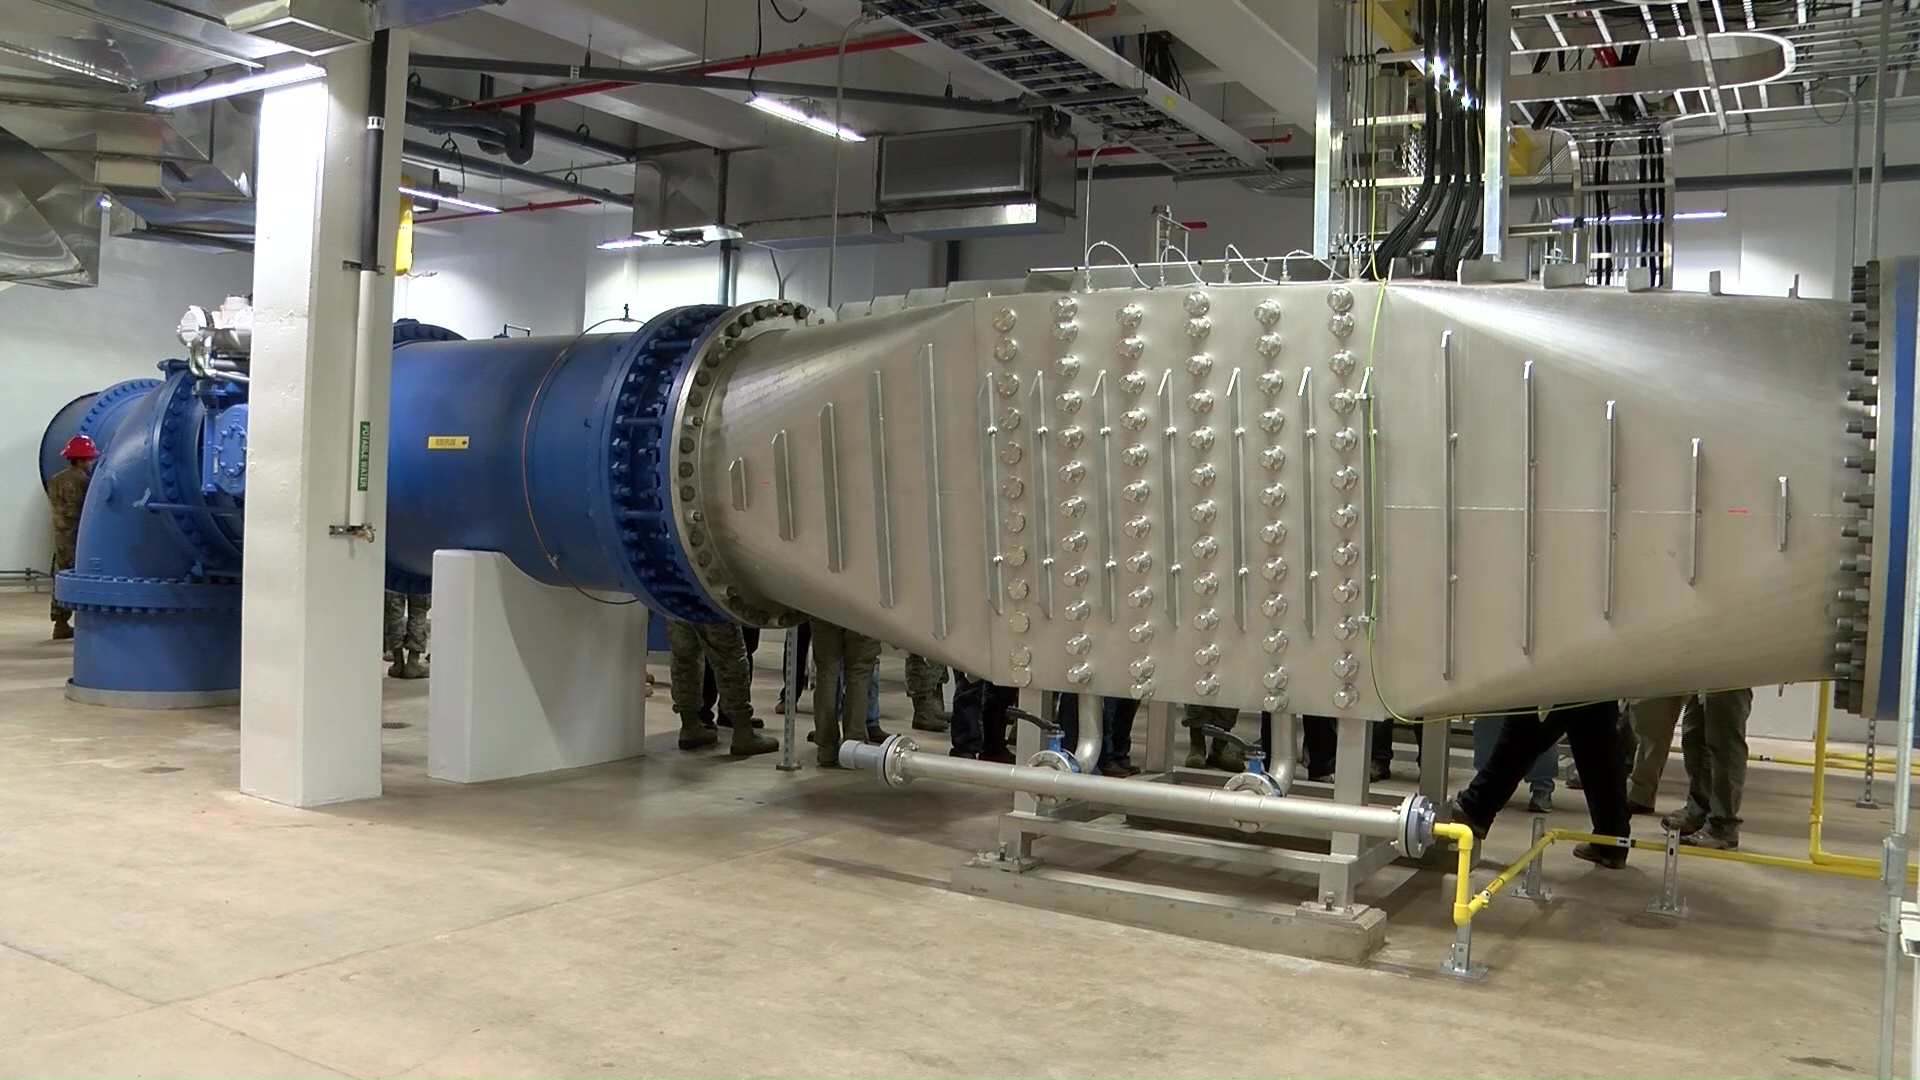 Tour of Great Falls Water Treatment Plant Highlights the New UV Disinfection System